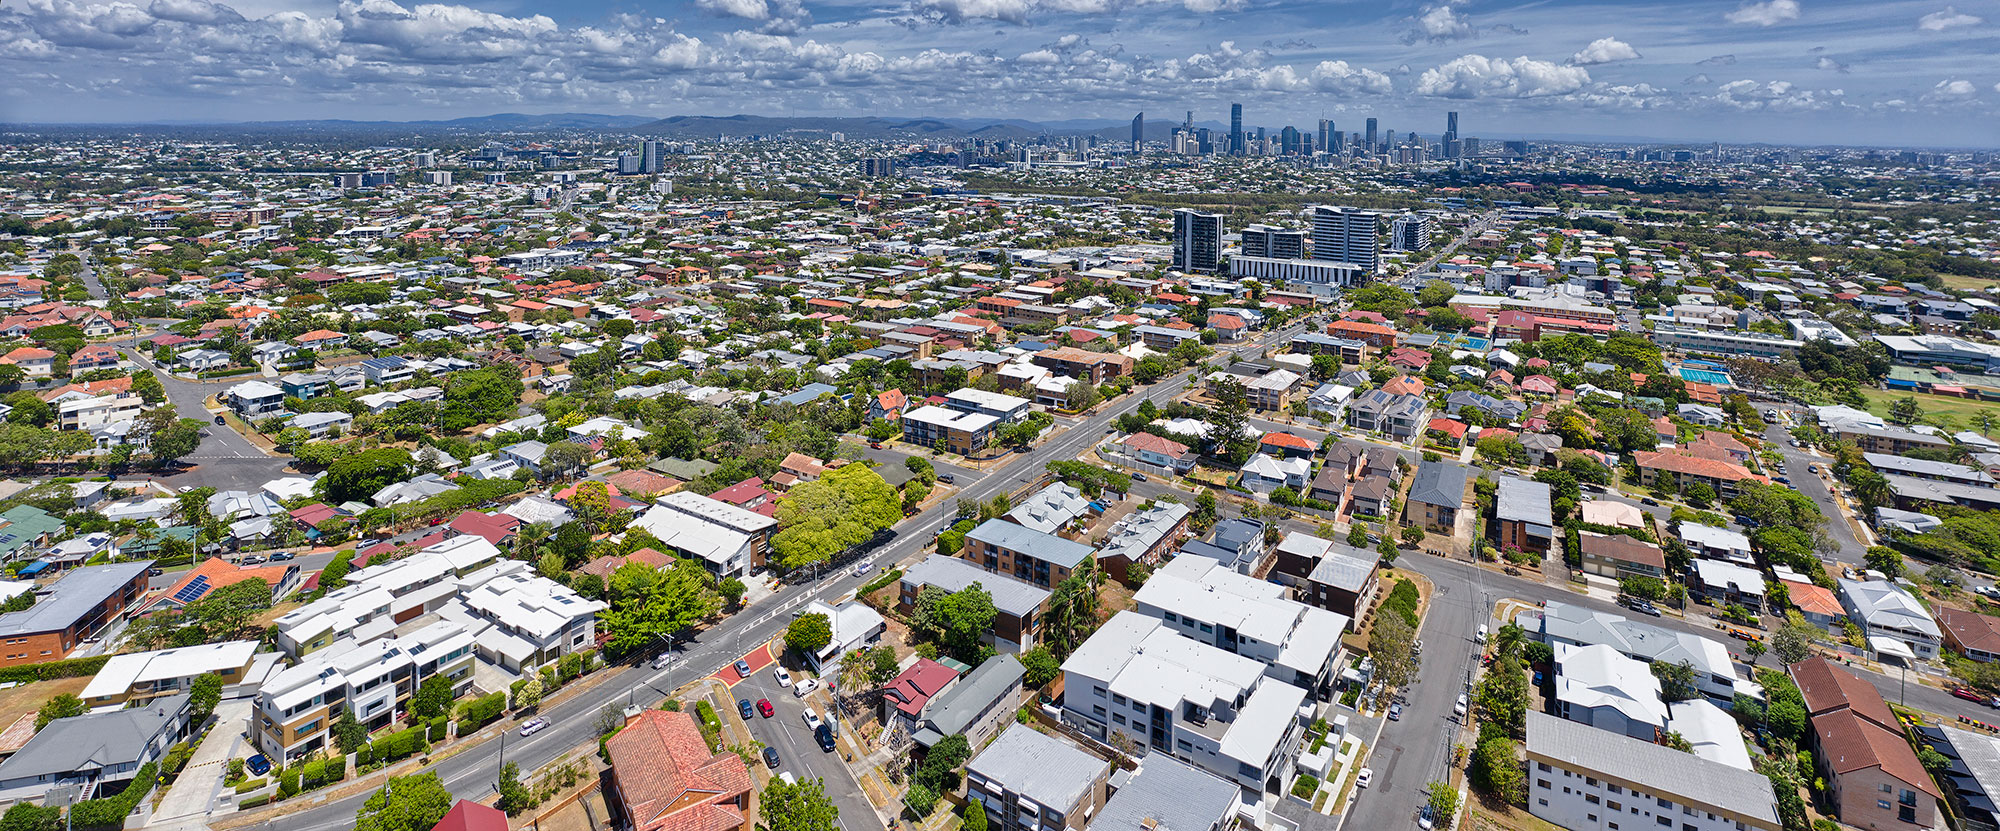 Aerial drone photography at 70 m above Coorparoo DroneAce Brisbane